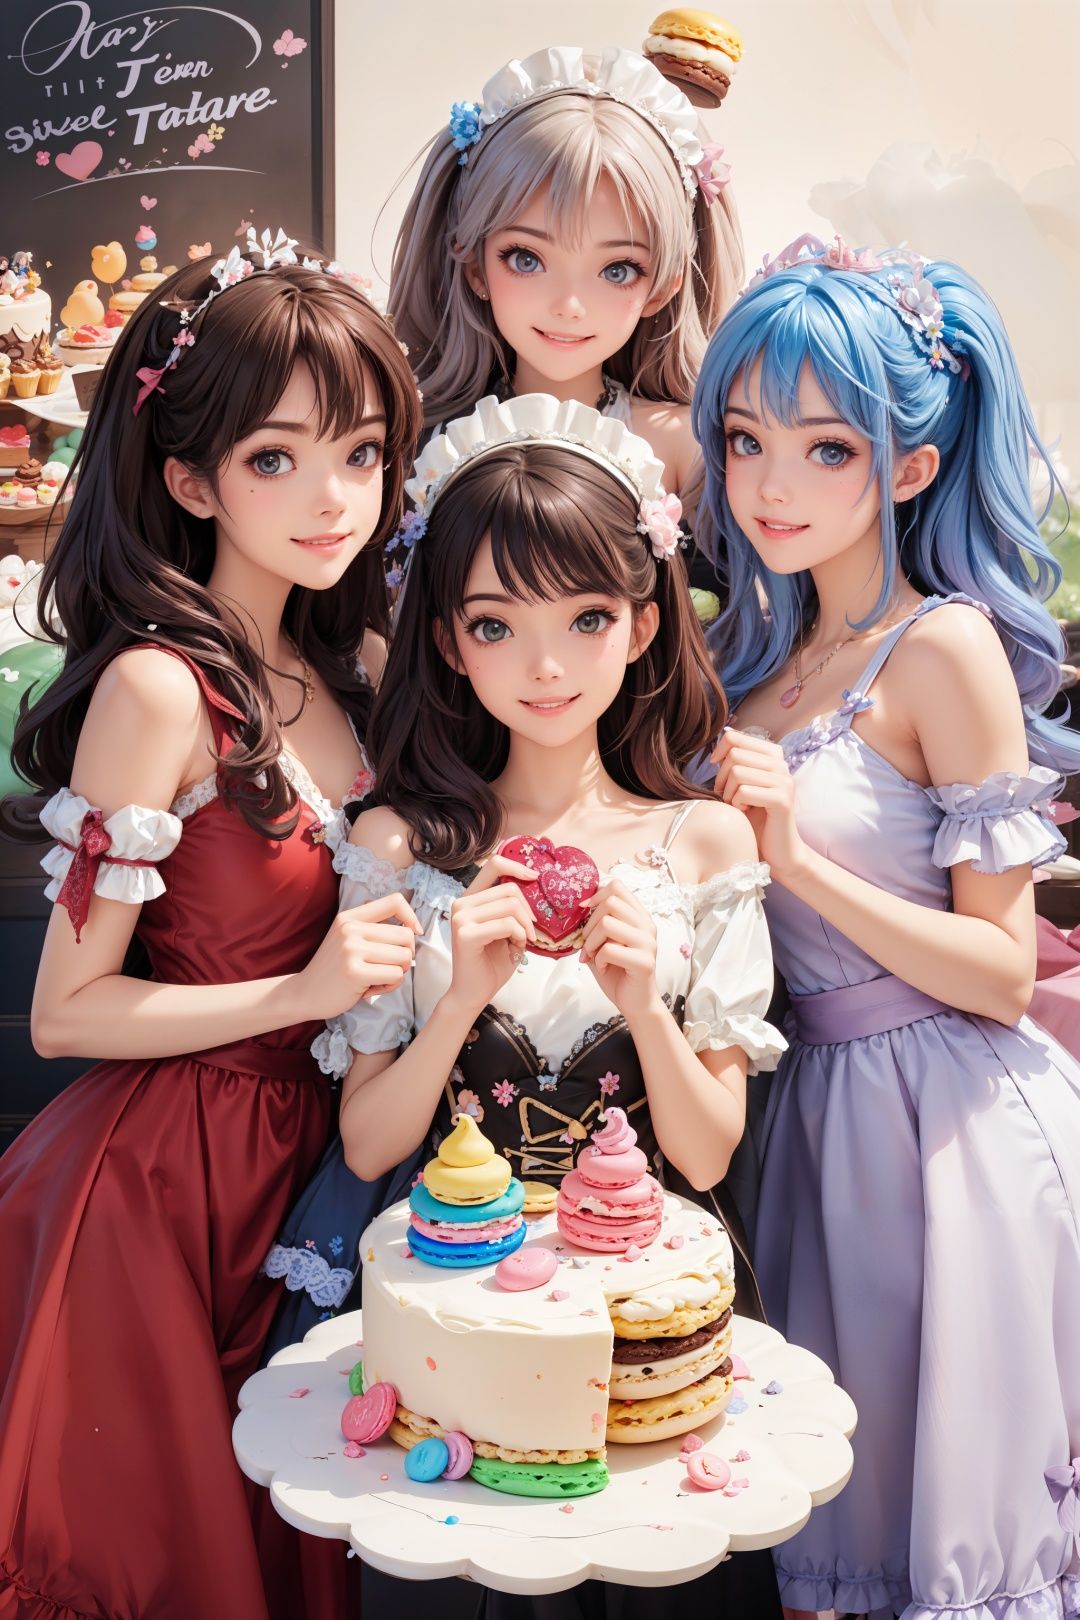 4+ girls, multiple colored hairs, sweet maids, random cute faces, super happy smiling, laughing,group shot, zoom camera, sweet tea party,lots of cakes, macarons, chocolates, parfaits, cookies, land of sweets